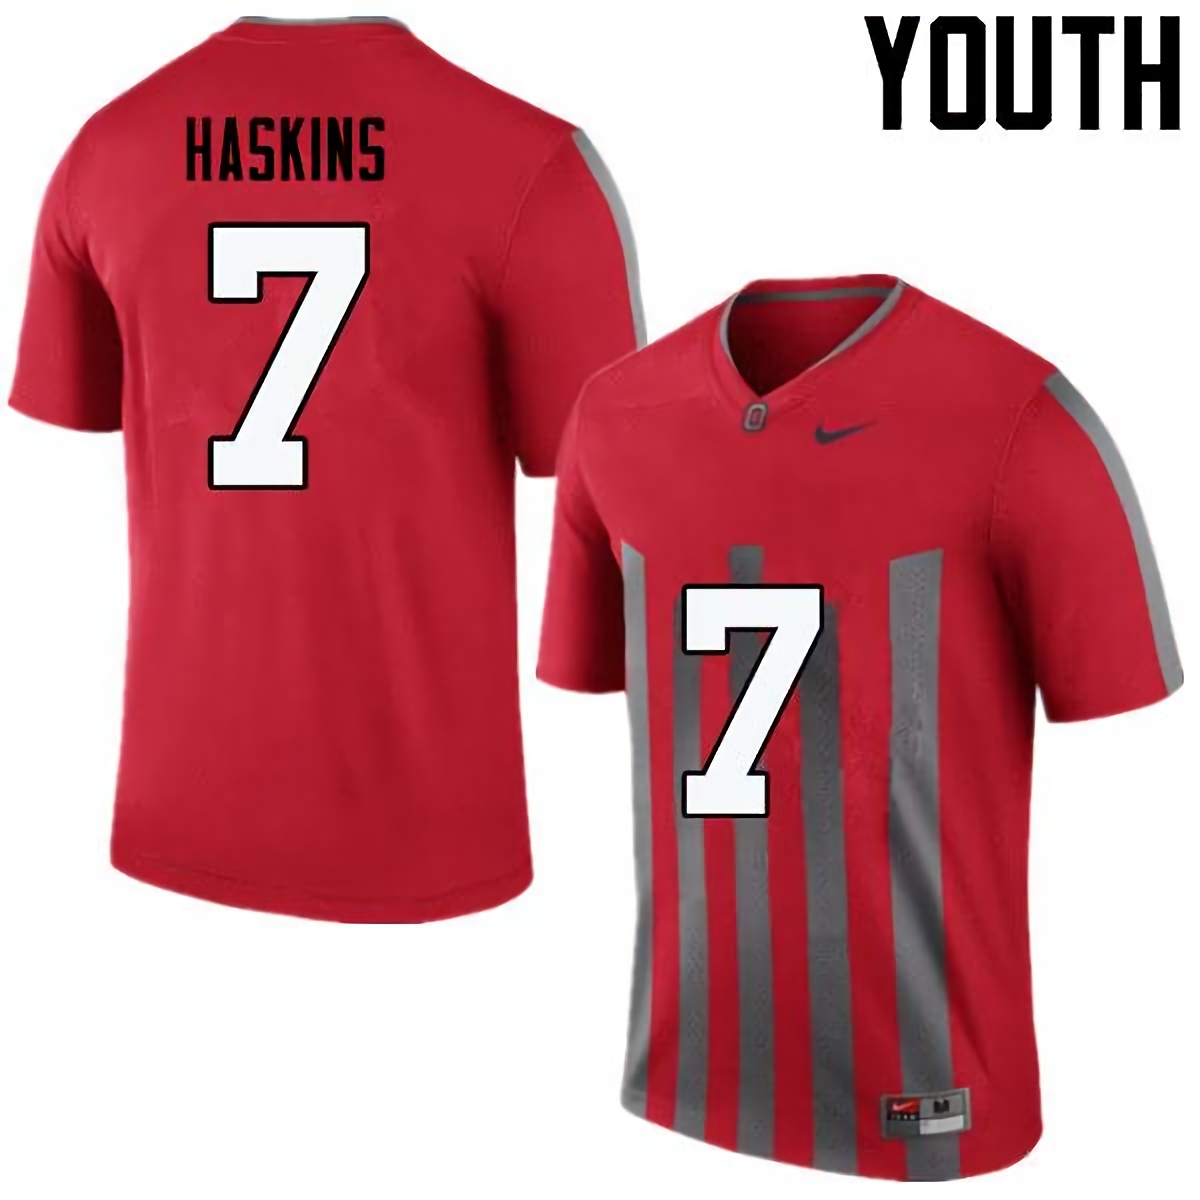 Dwayne Haskins Ohio State Buckeyes Youth NCAA #7 Nike Throwback Red College Stitched Football Jersey LSS2156CR